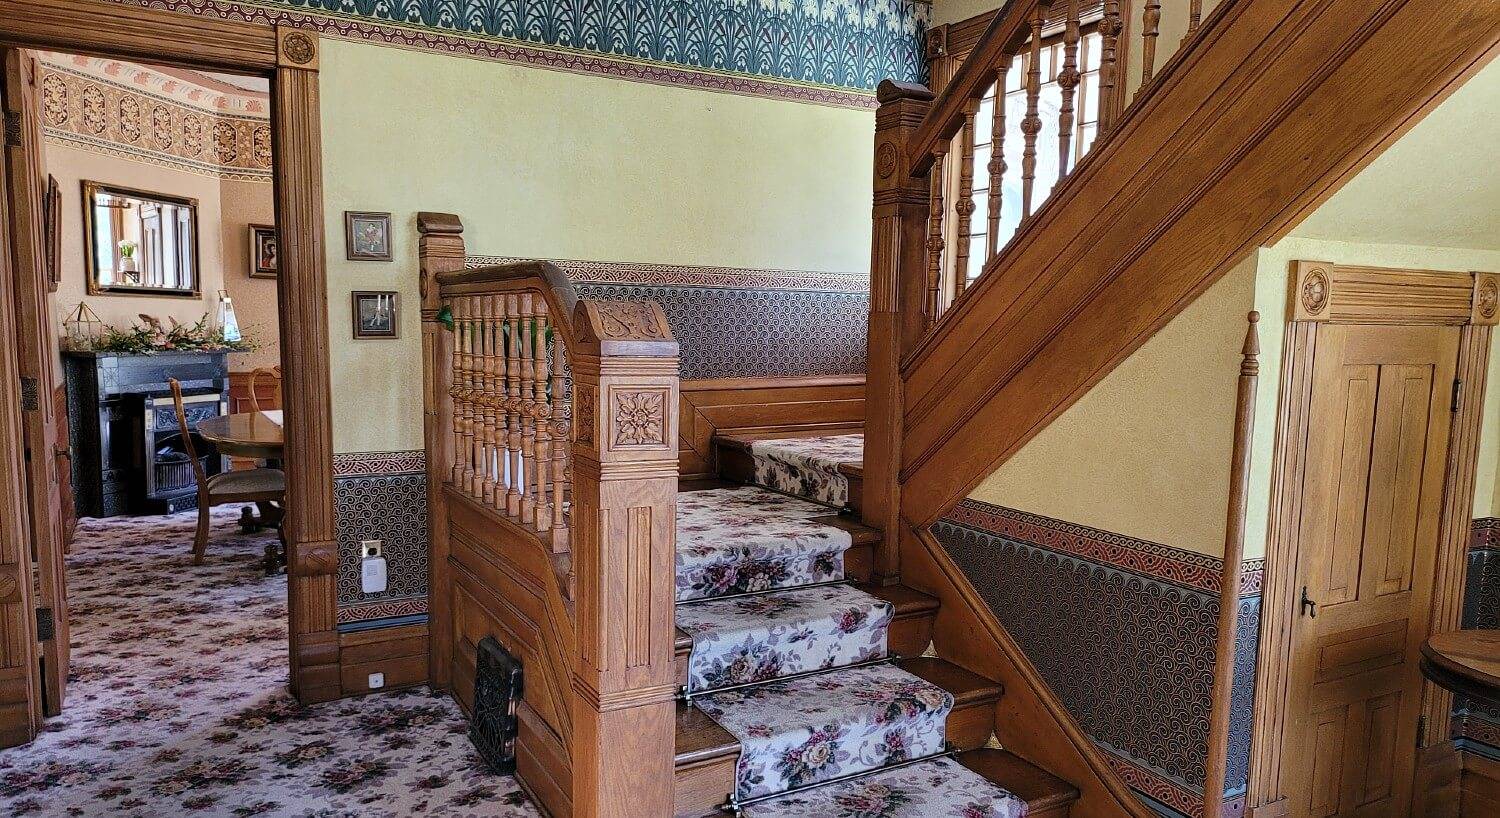 Front entry of a historic home showing a carpeted stairway and doorway leading into a dining room